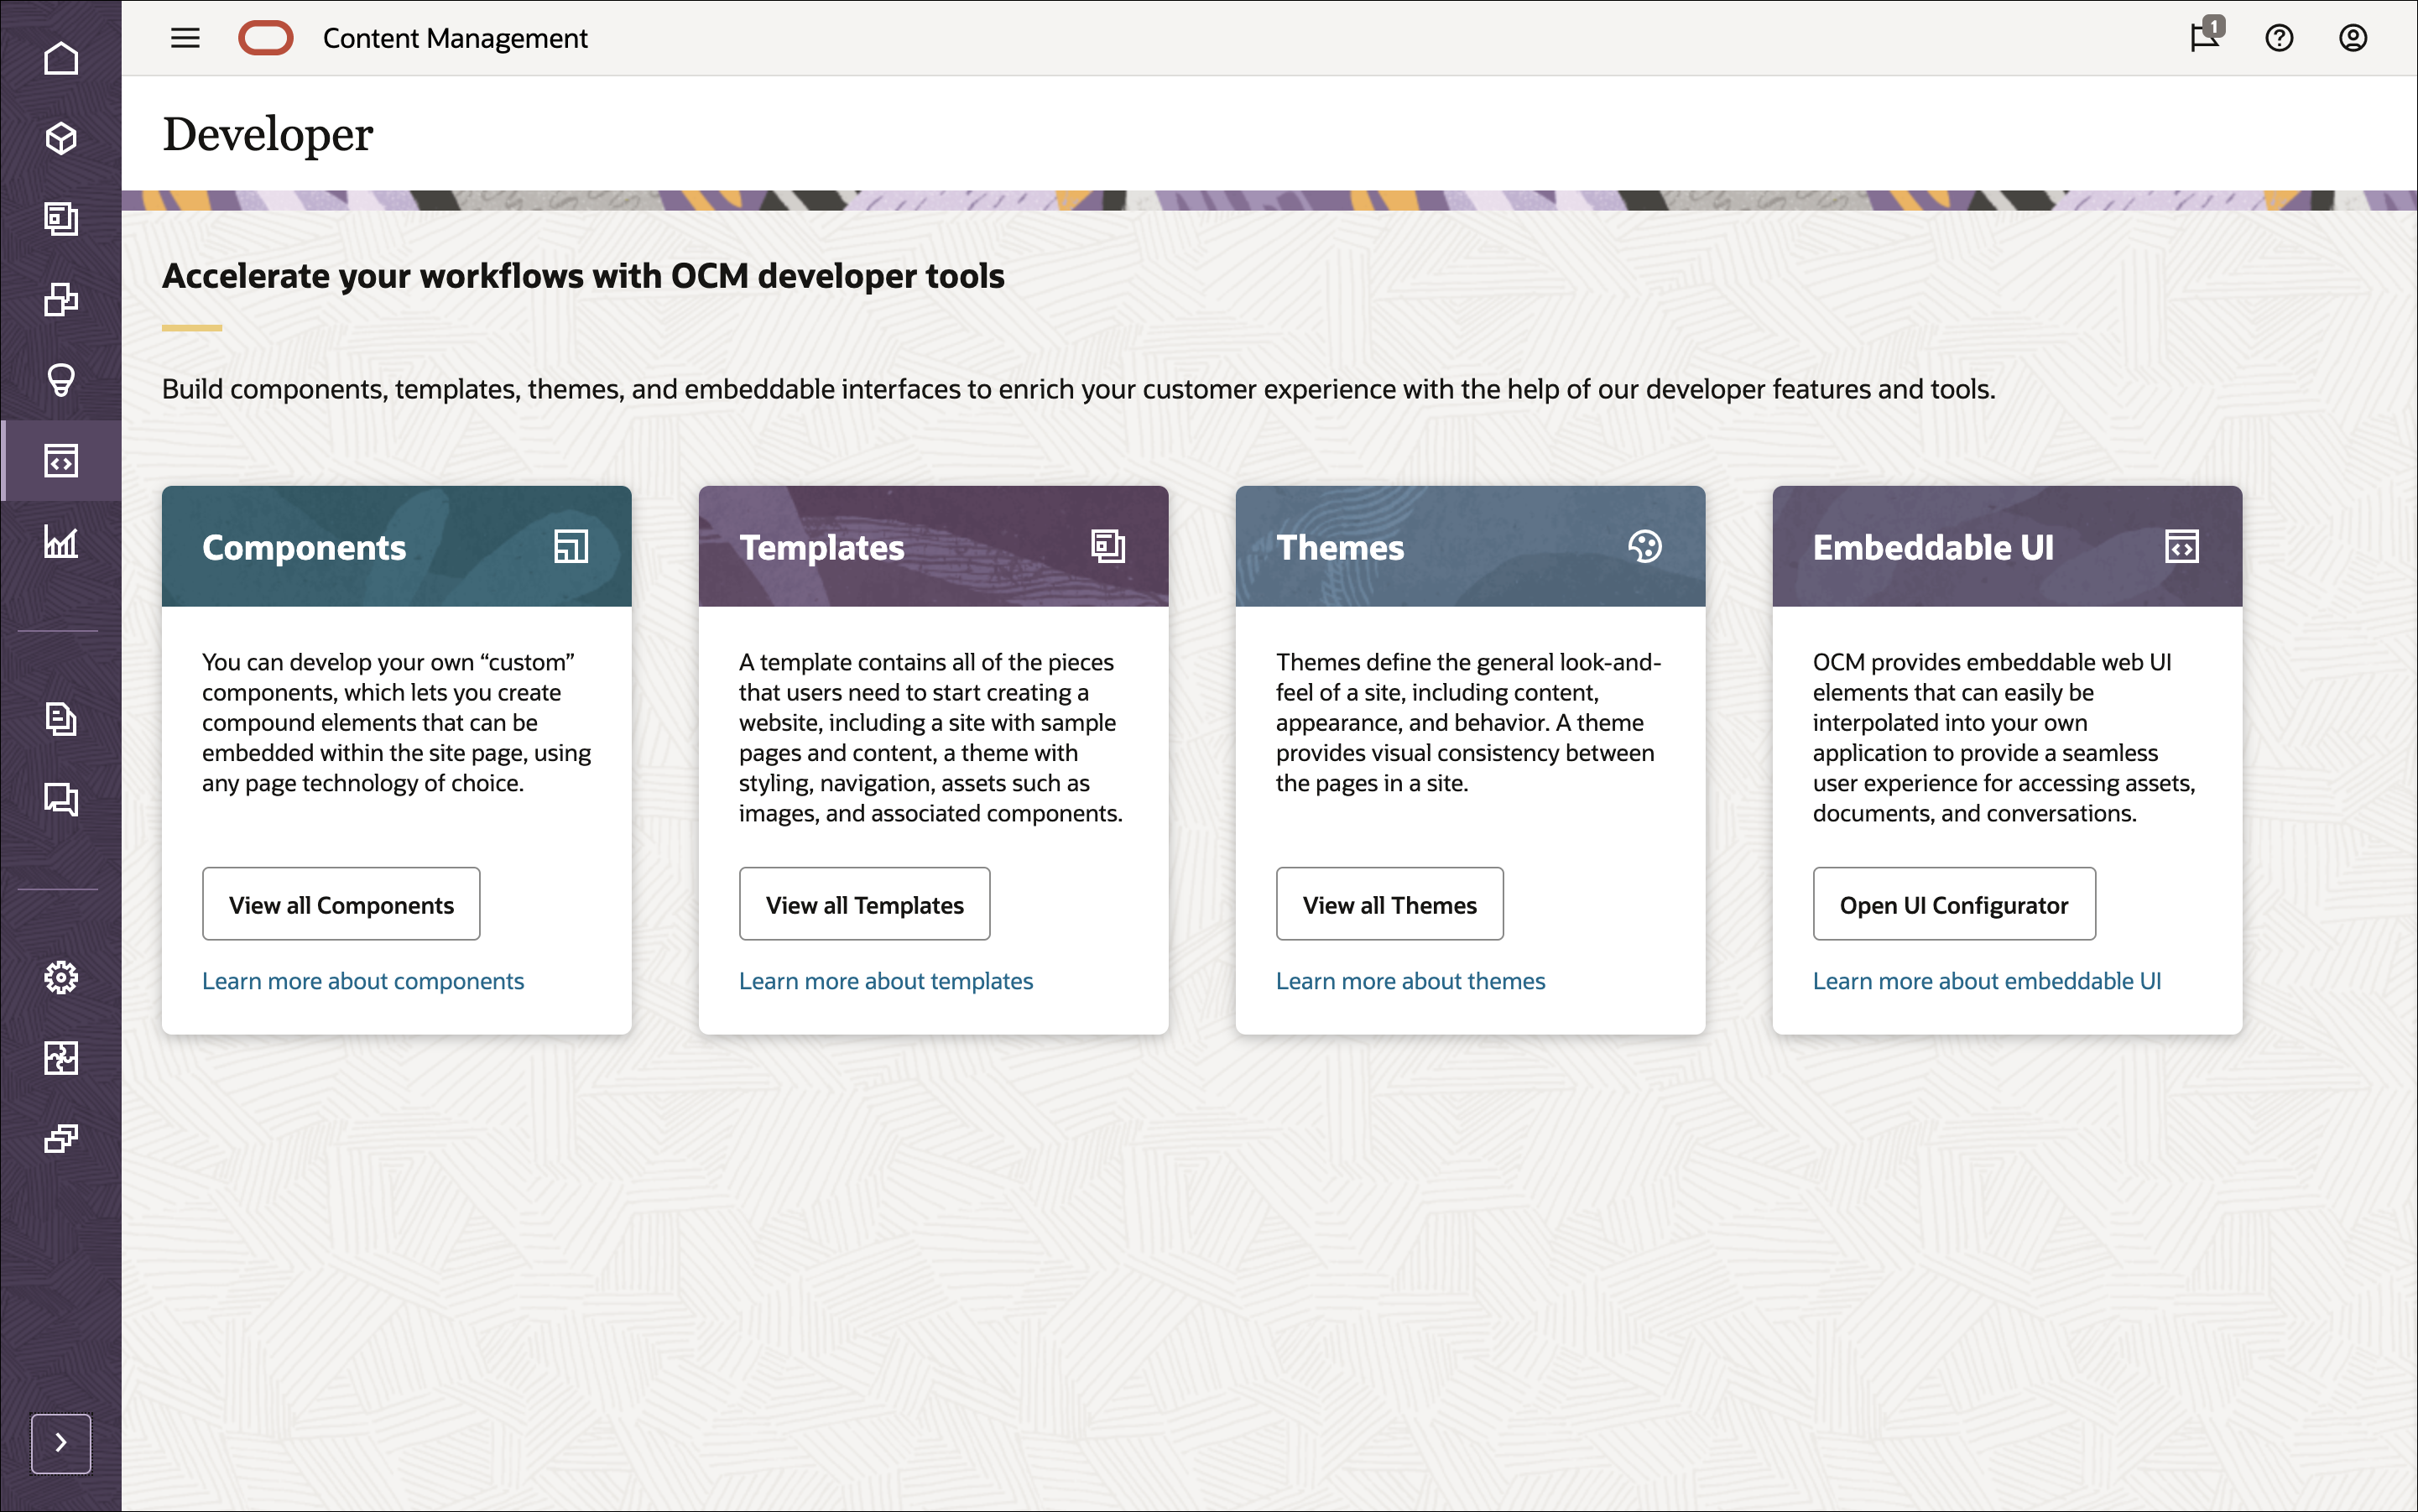 This image shows the Developer page in the Oracle Content Management web interface, with links to components, template, themes, and embeddable UI.